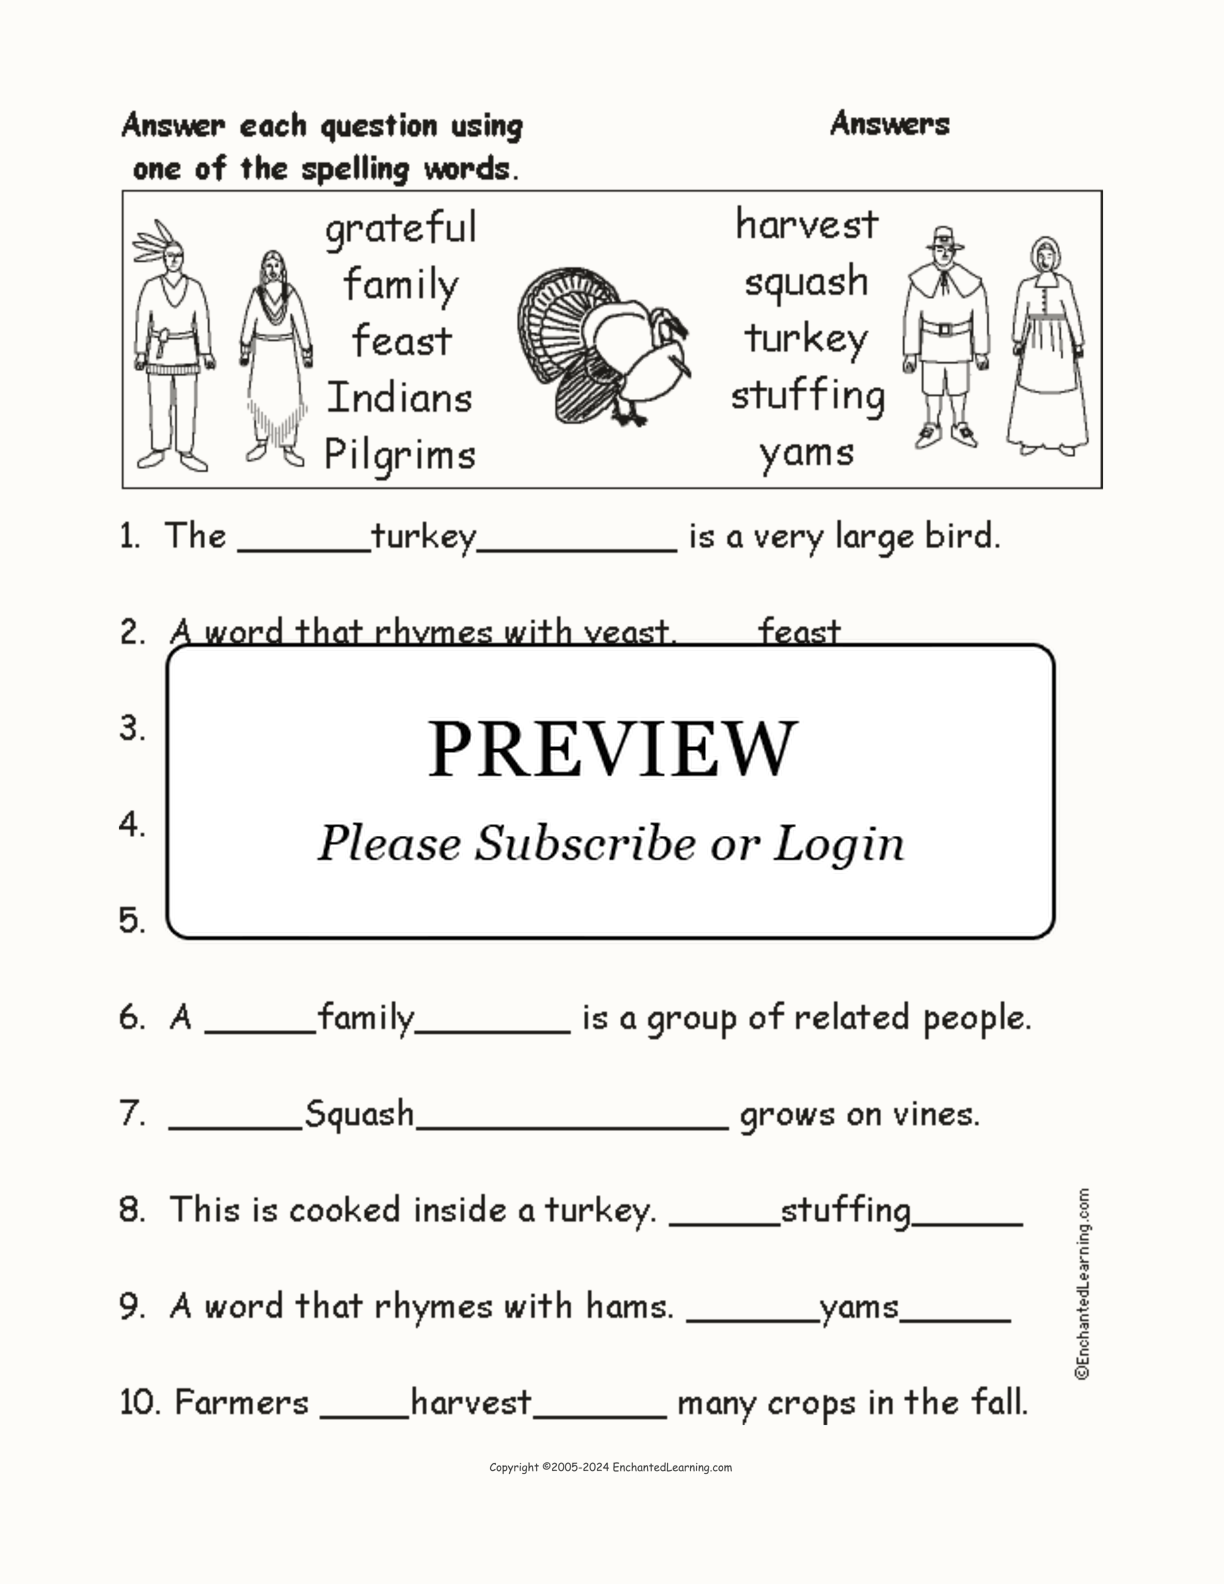 Thanksgiving Spelling Word Questions interactive worksheet page 2